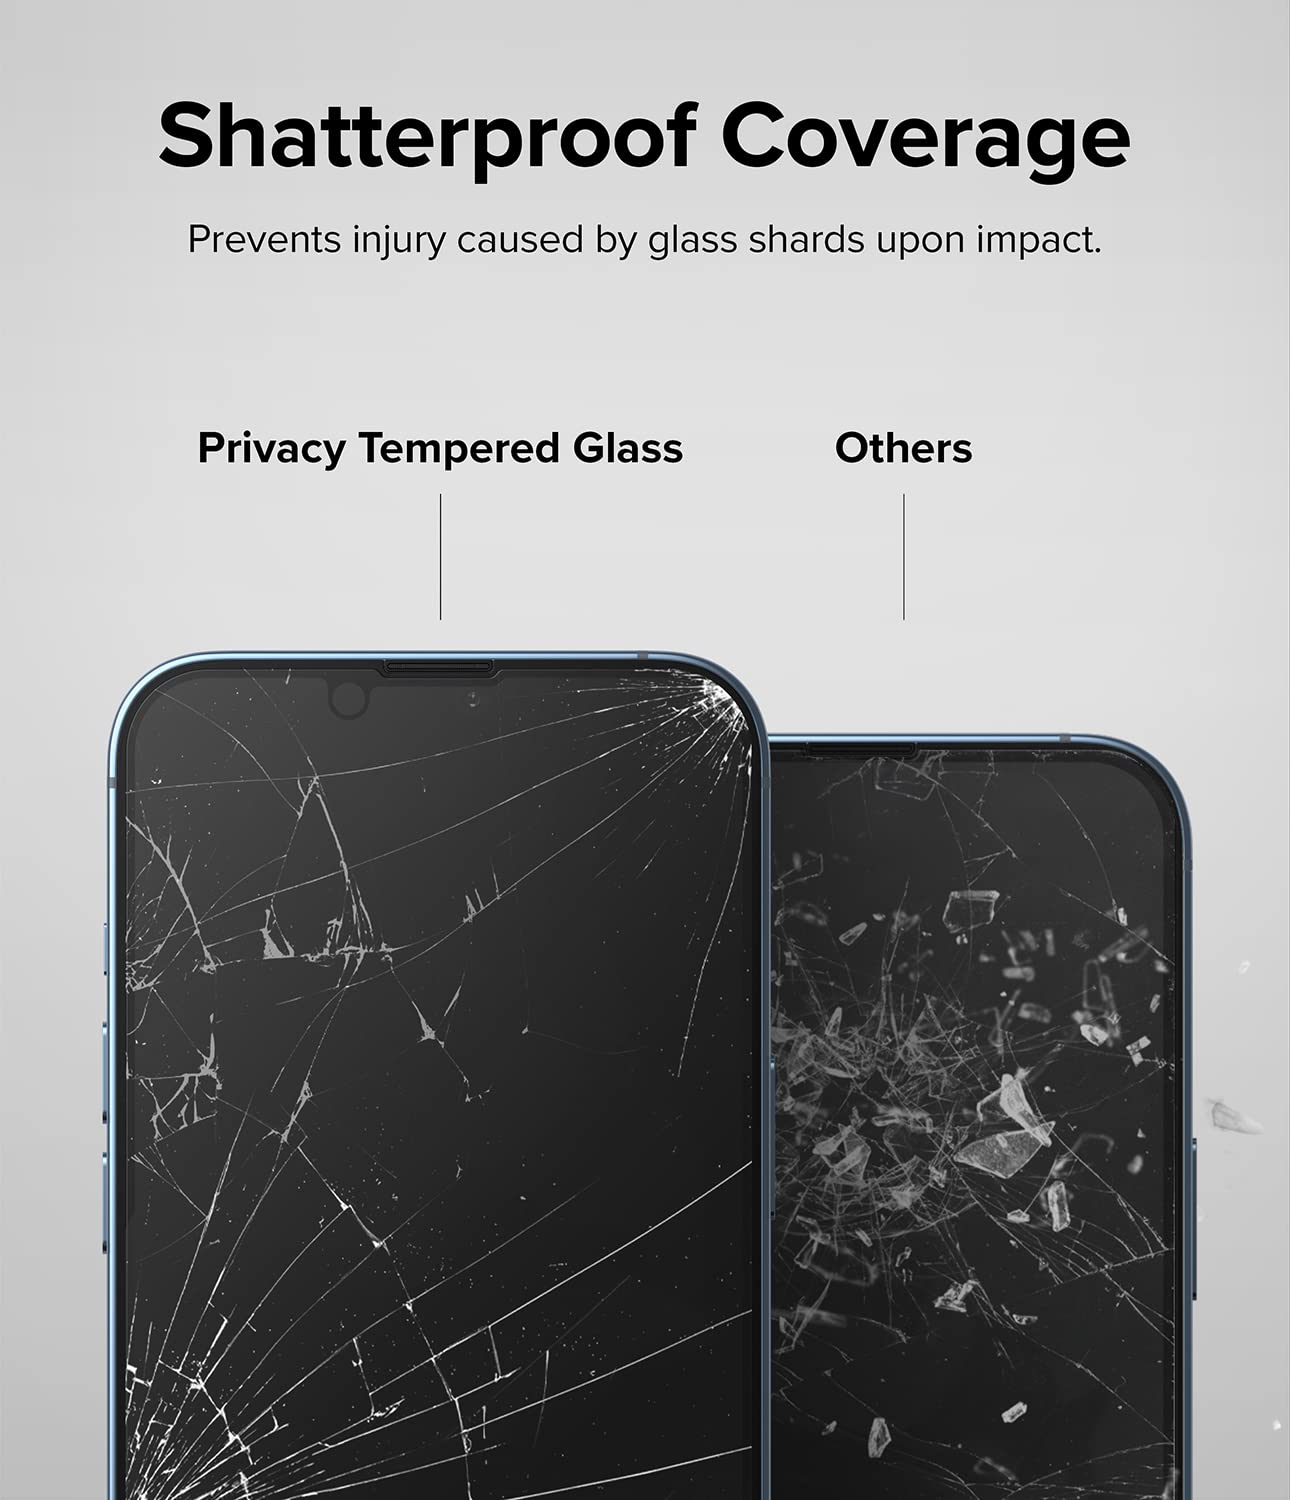 Apple iPhone X Screen Protector - Privacy